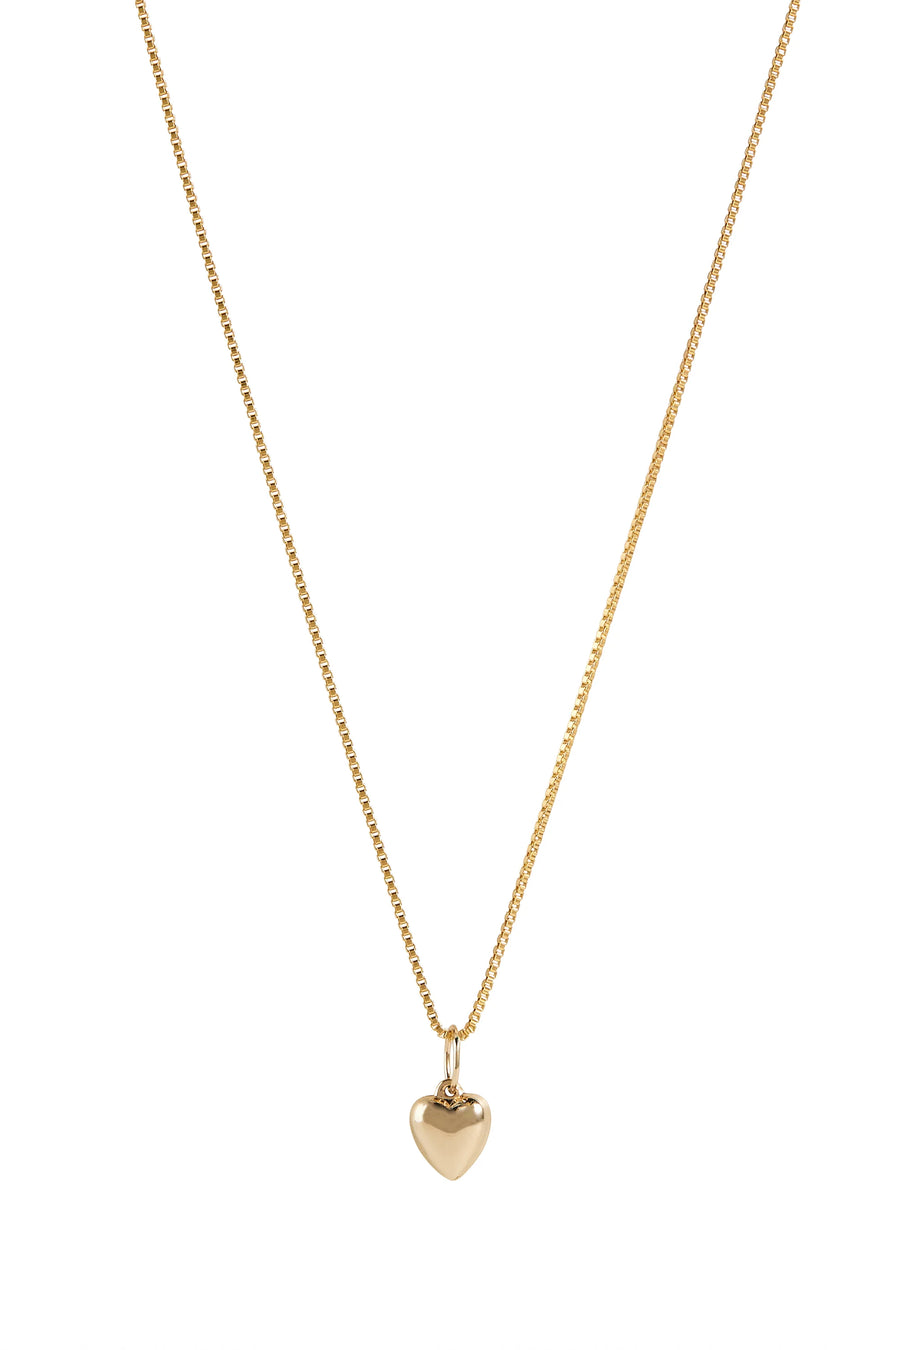 LISBETH JEWELRY - FLORENCE NECKLACE - FILLED GOLD